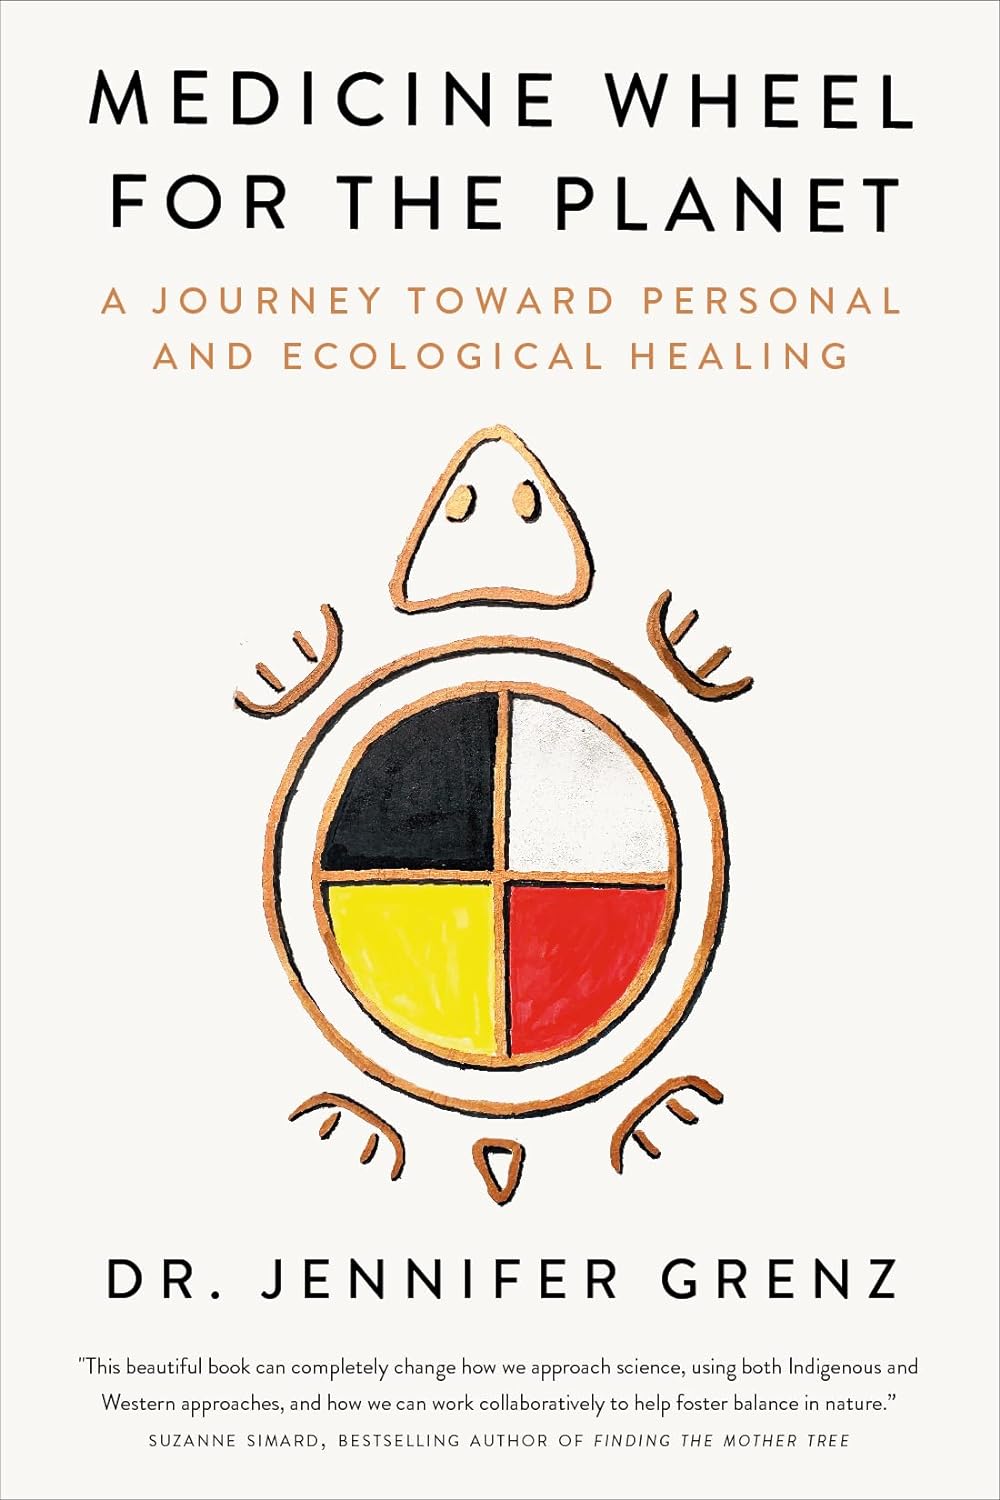 Medicine Wheel for the Planet
A Journey Toward Personal and Ecological Healing